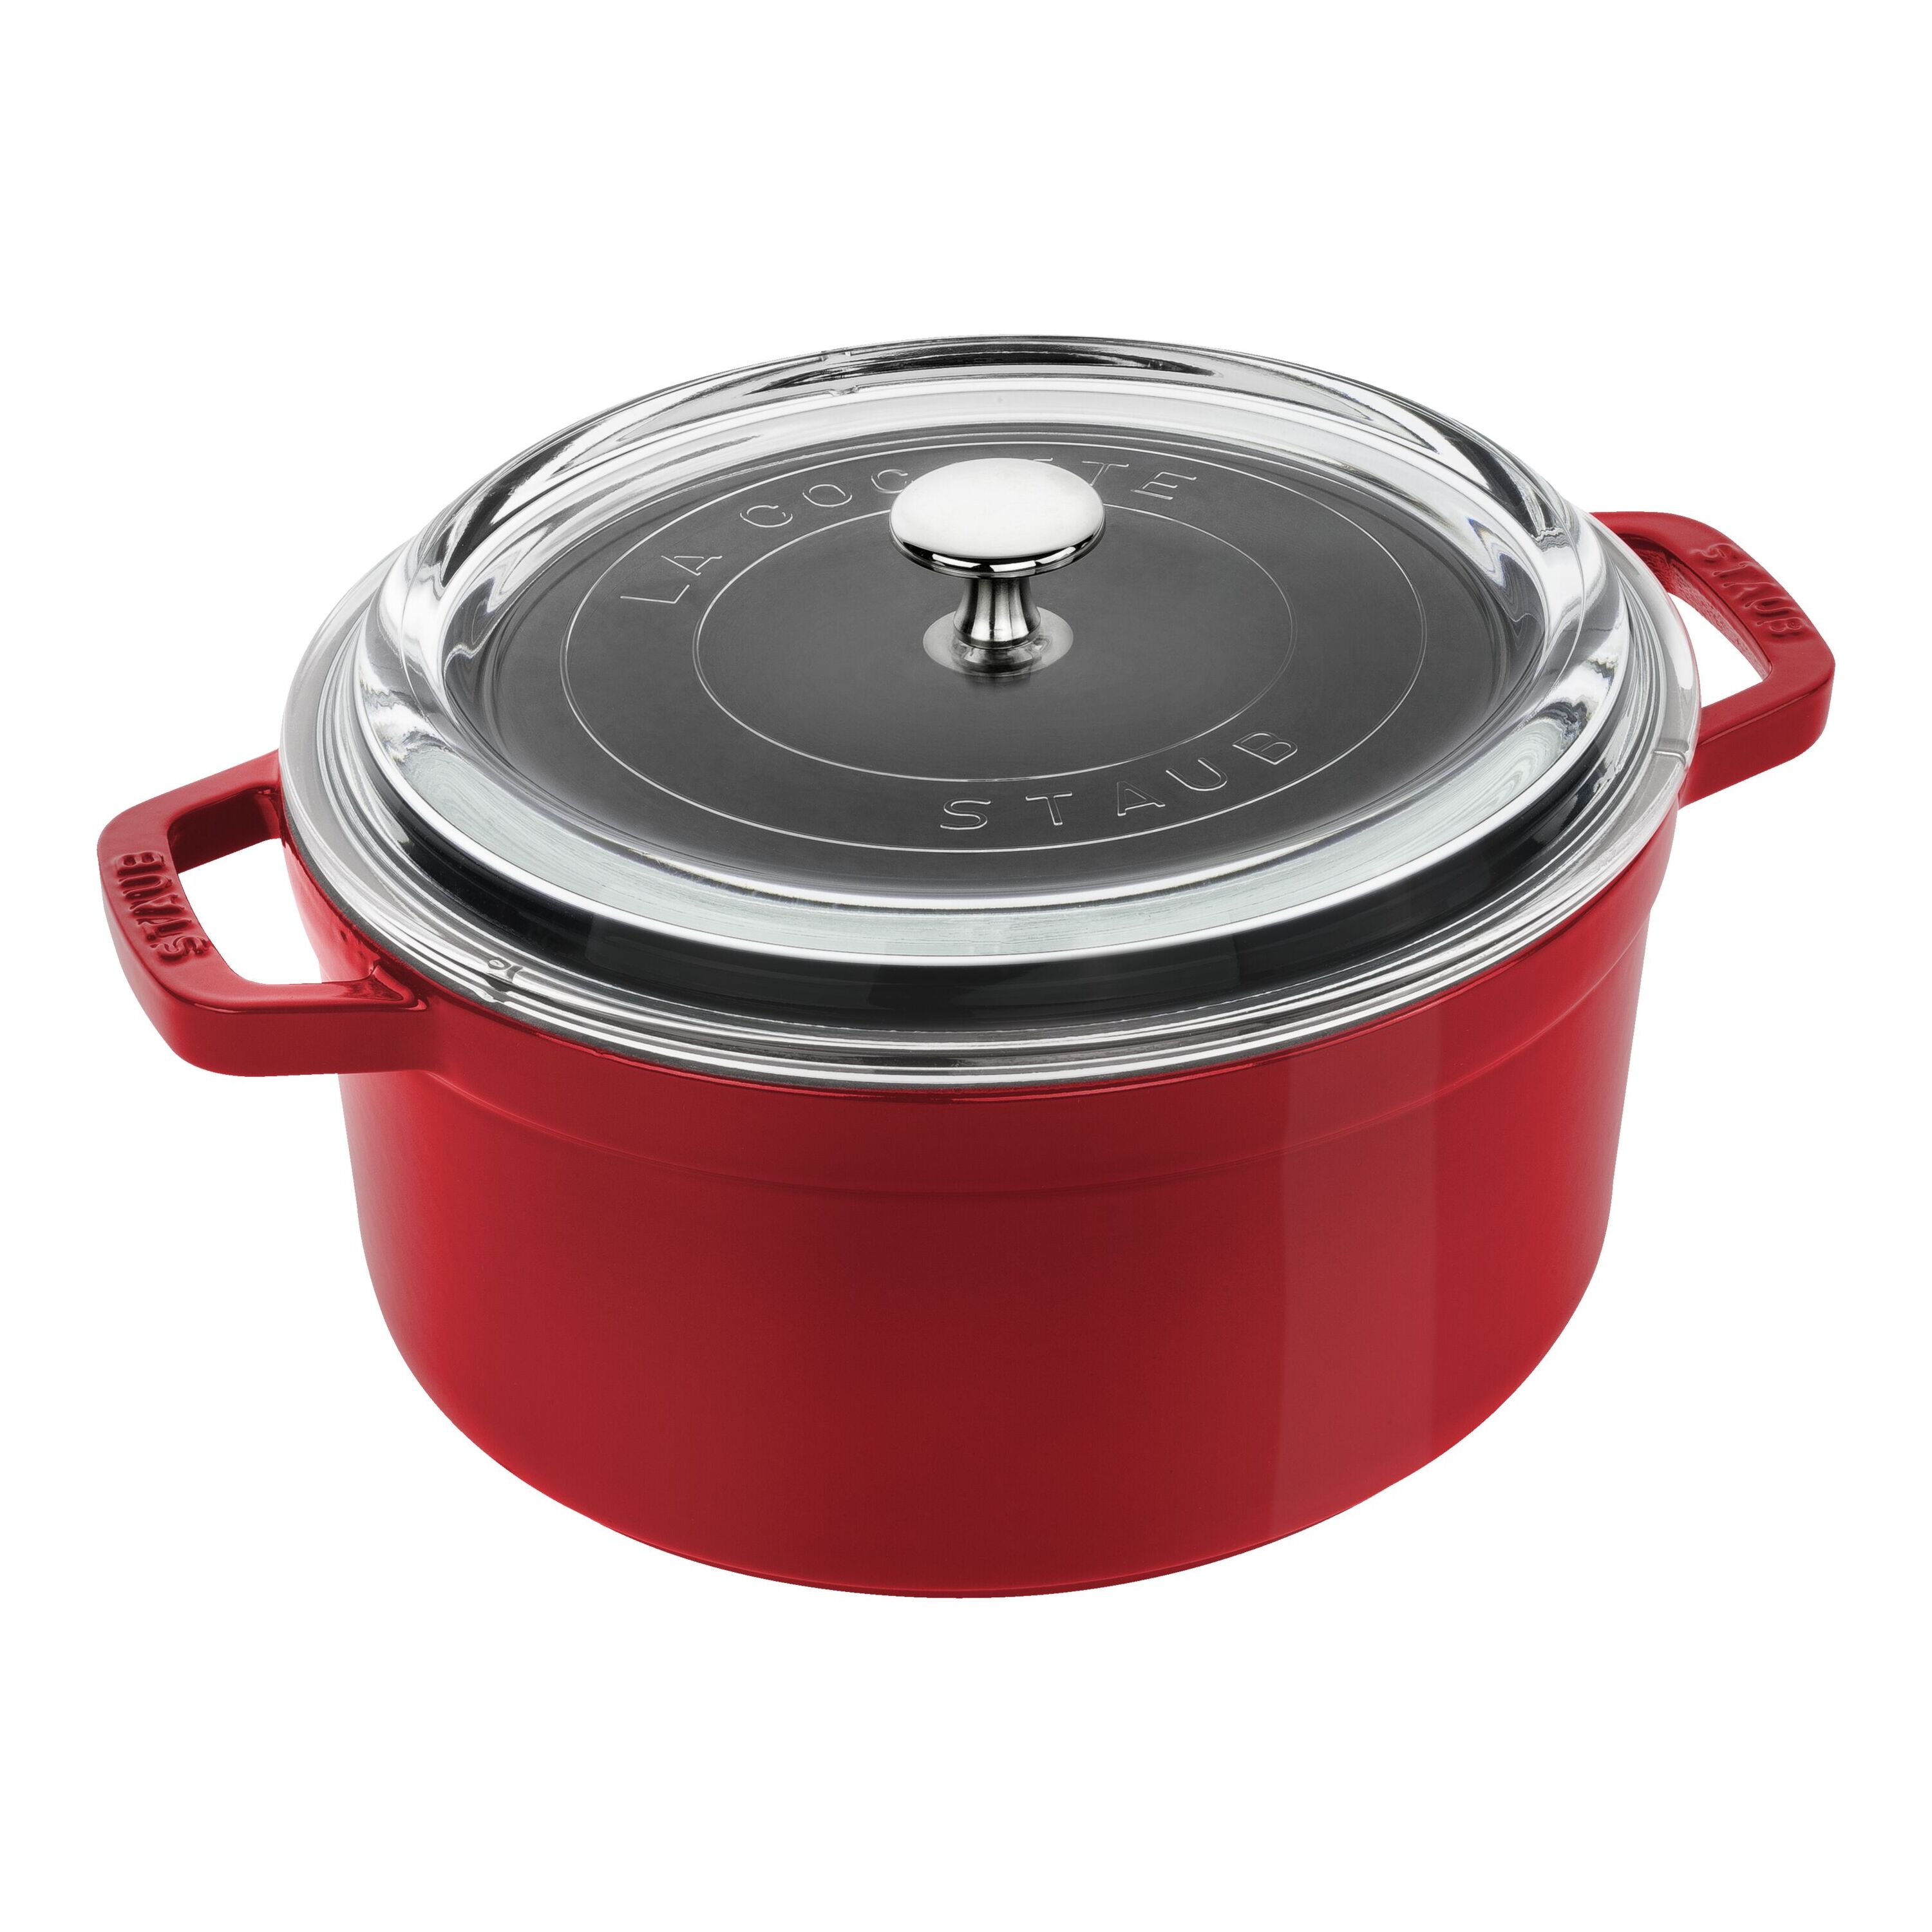 Staub Cast Iron 4-qt Round Cocotte with Glass Lid - Graphite Grey